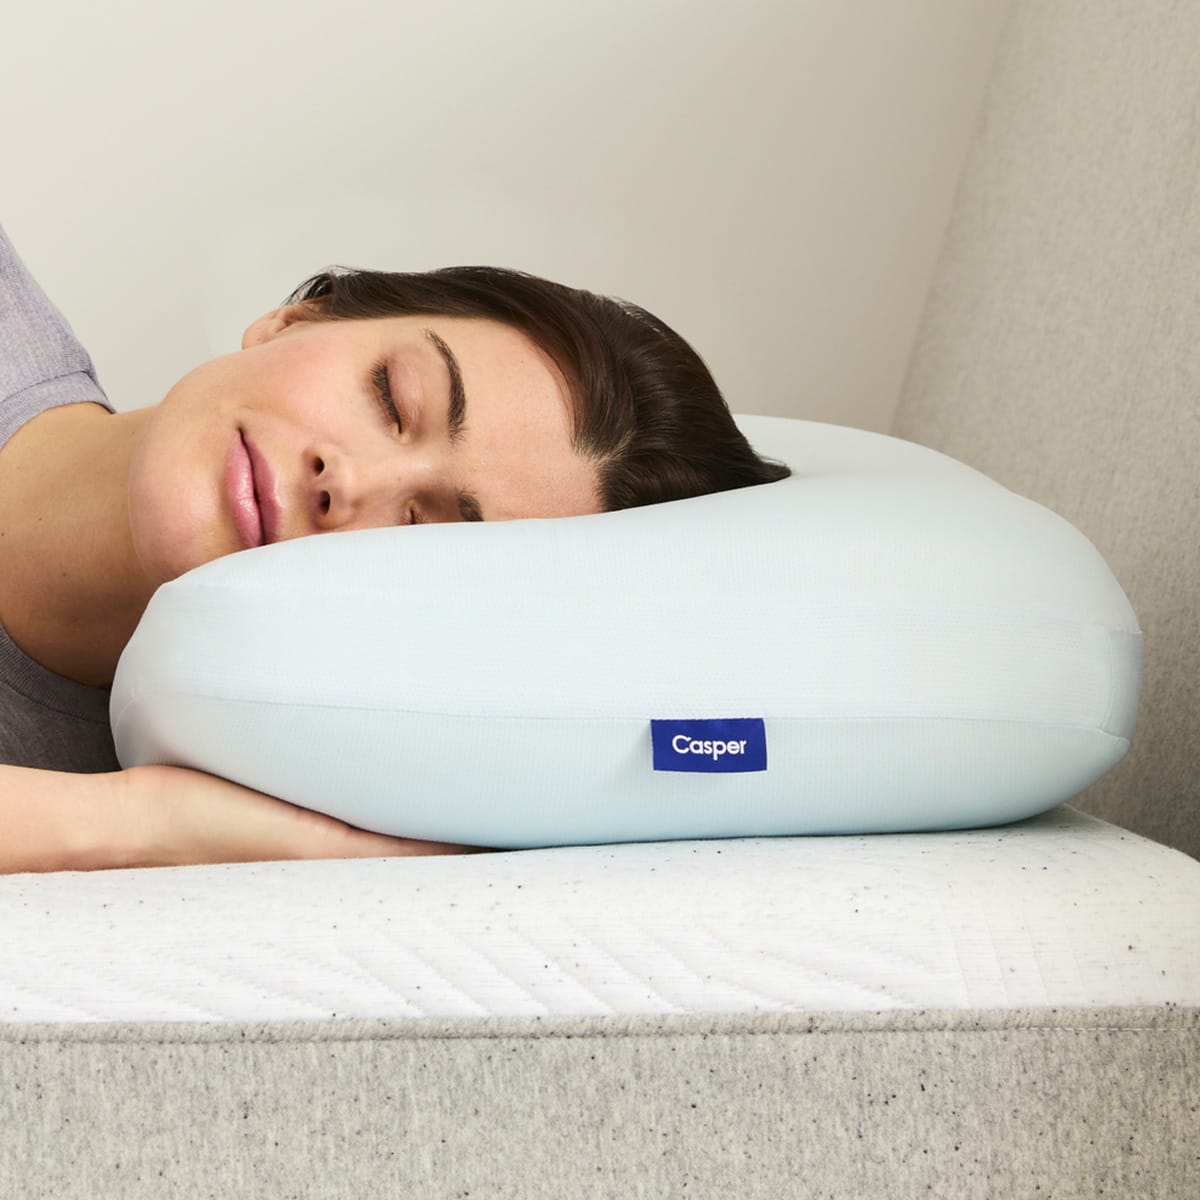 Casper's new pillow is here — and it's great for hot sleepers